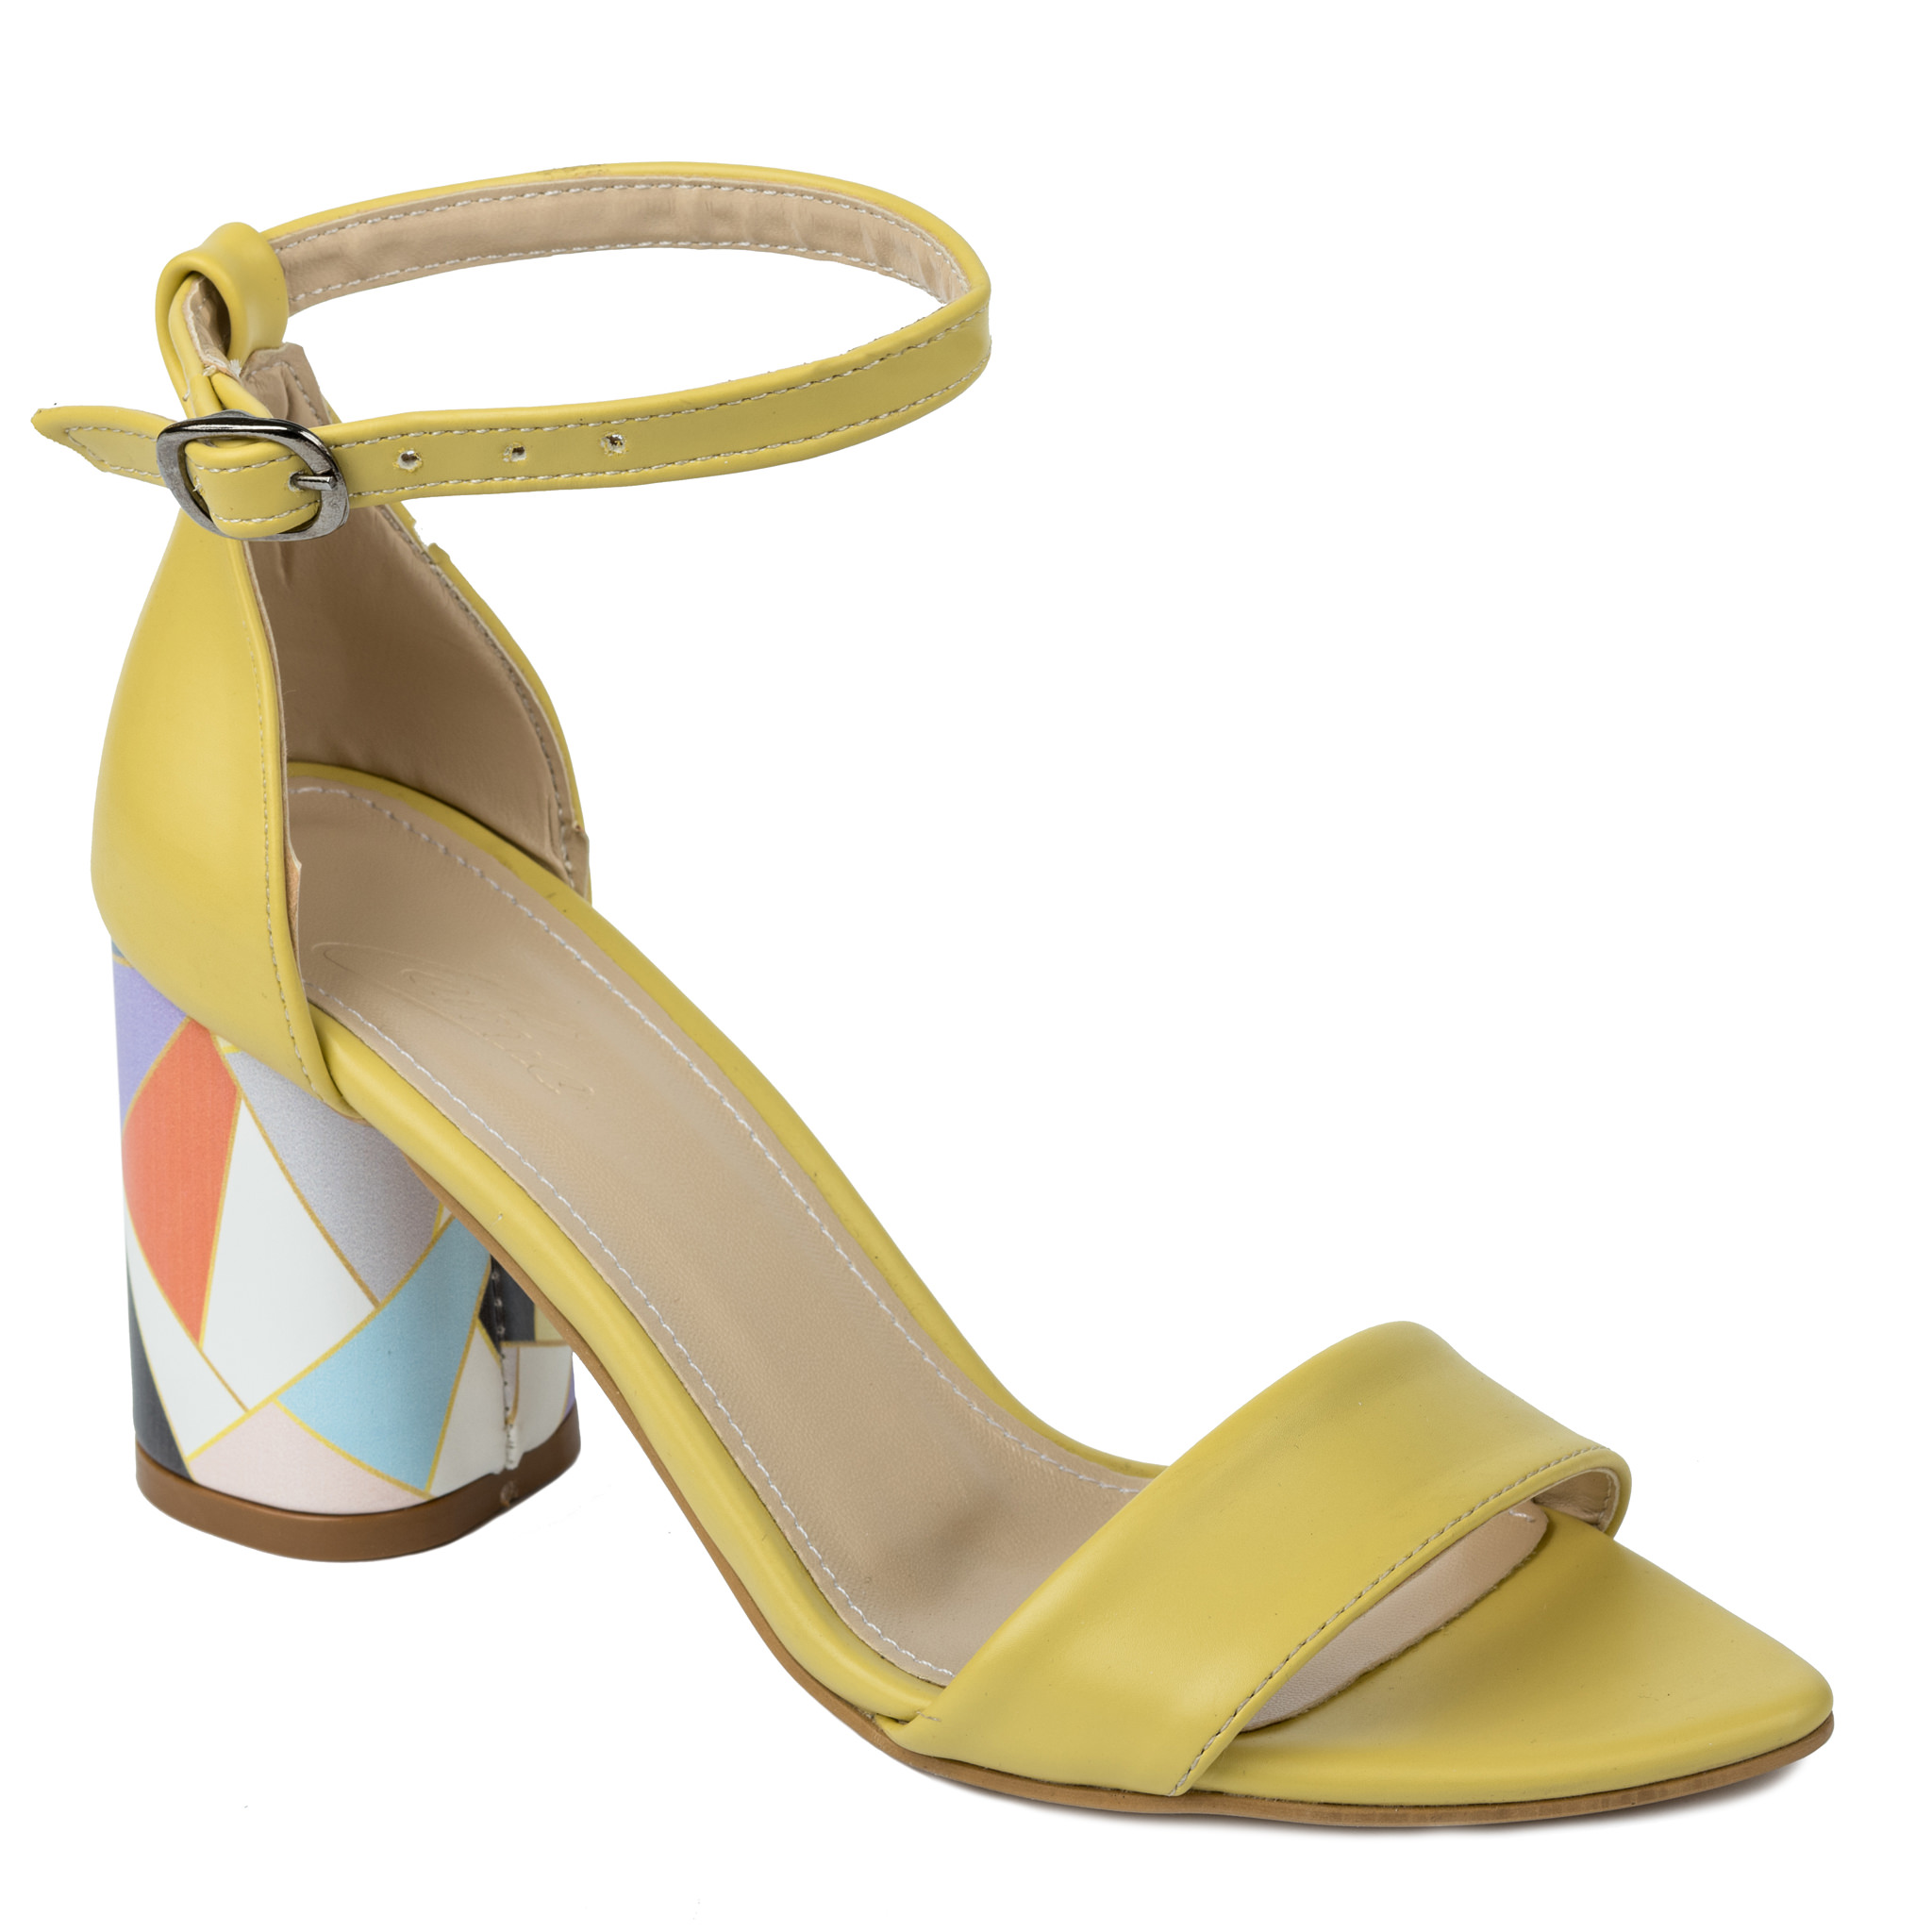 SANDALS WITH COLORFUL BLOCK HEEL - YELLOW